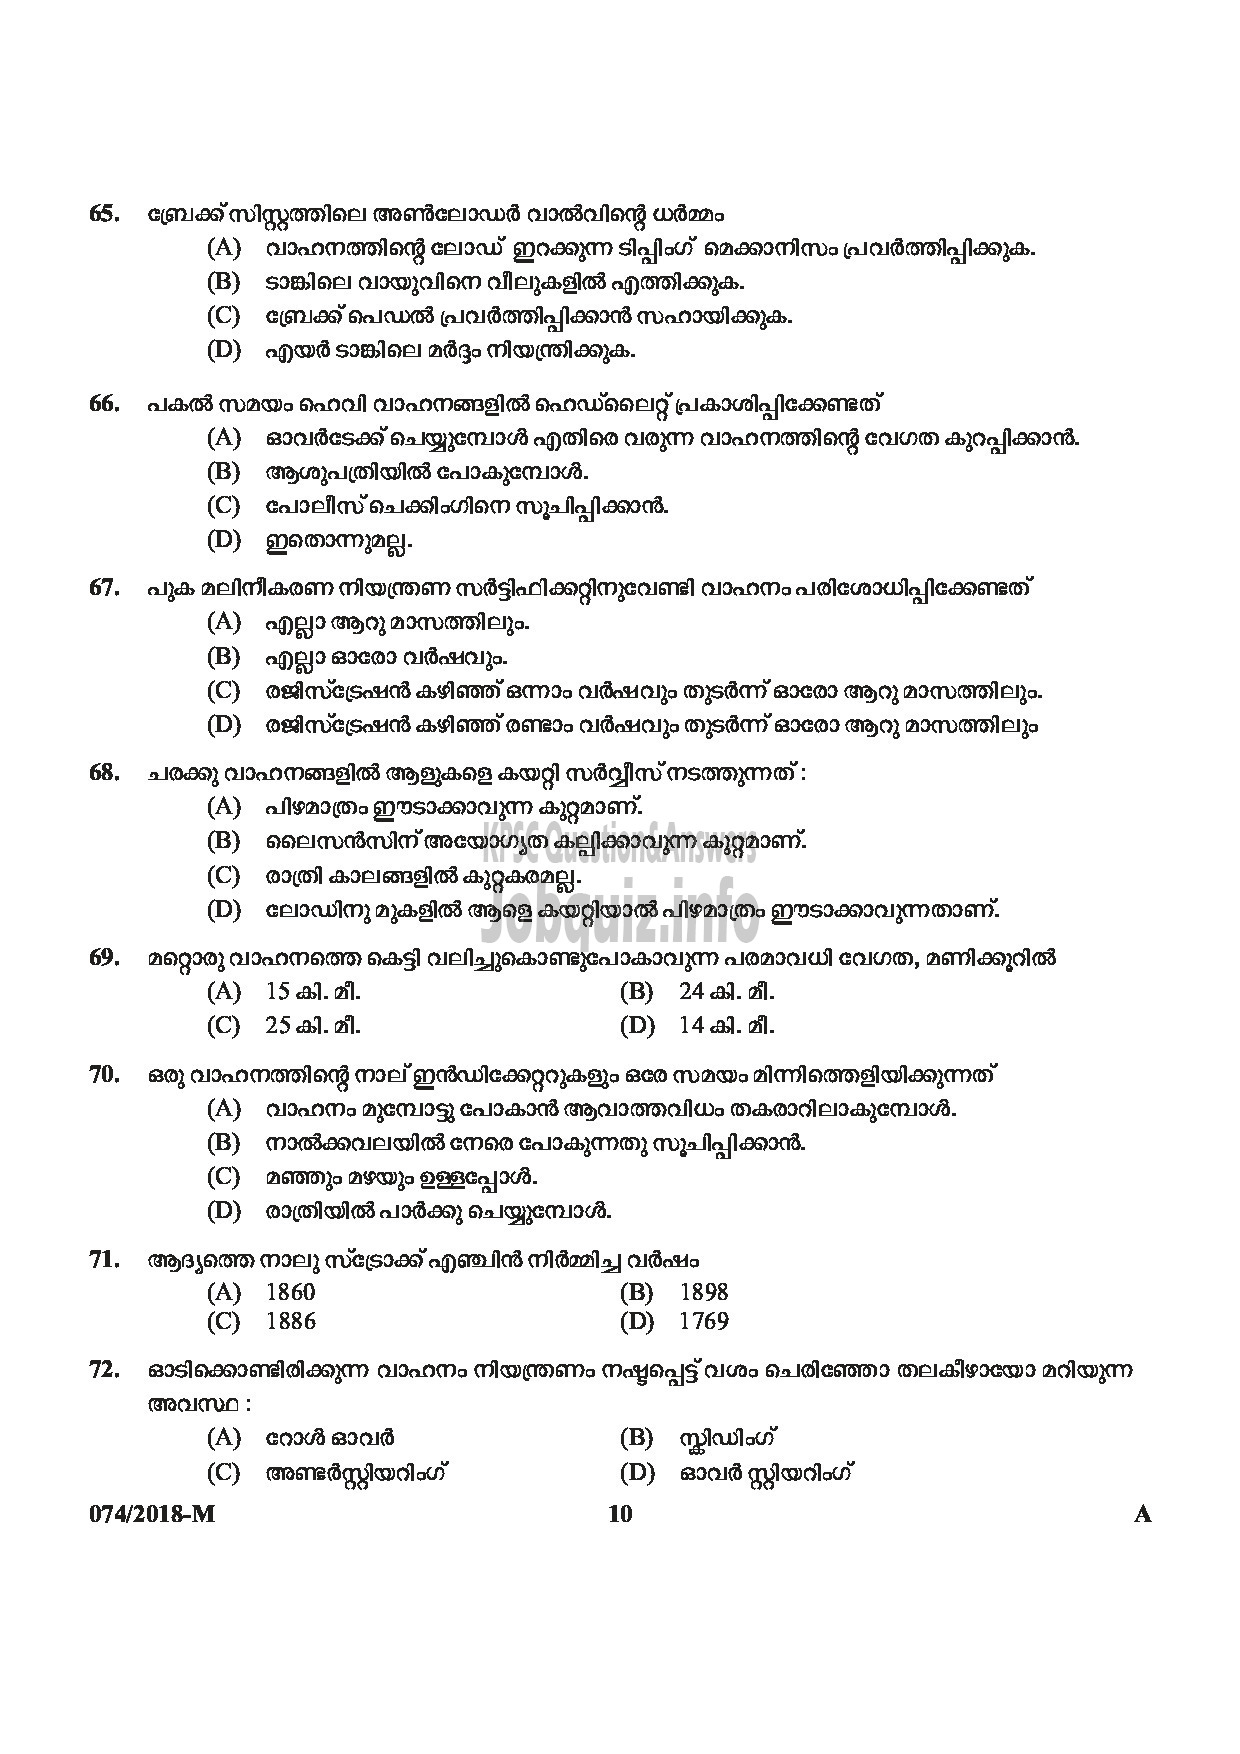 Kerala PSC Question Paper - POLICE CONSTABLE DRIVER ARMED POLICE BATTALION POLICE-10